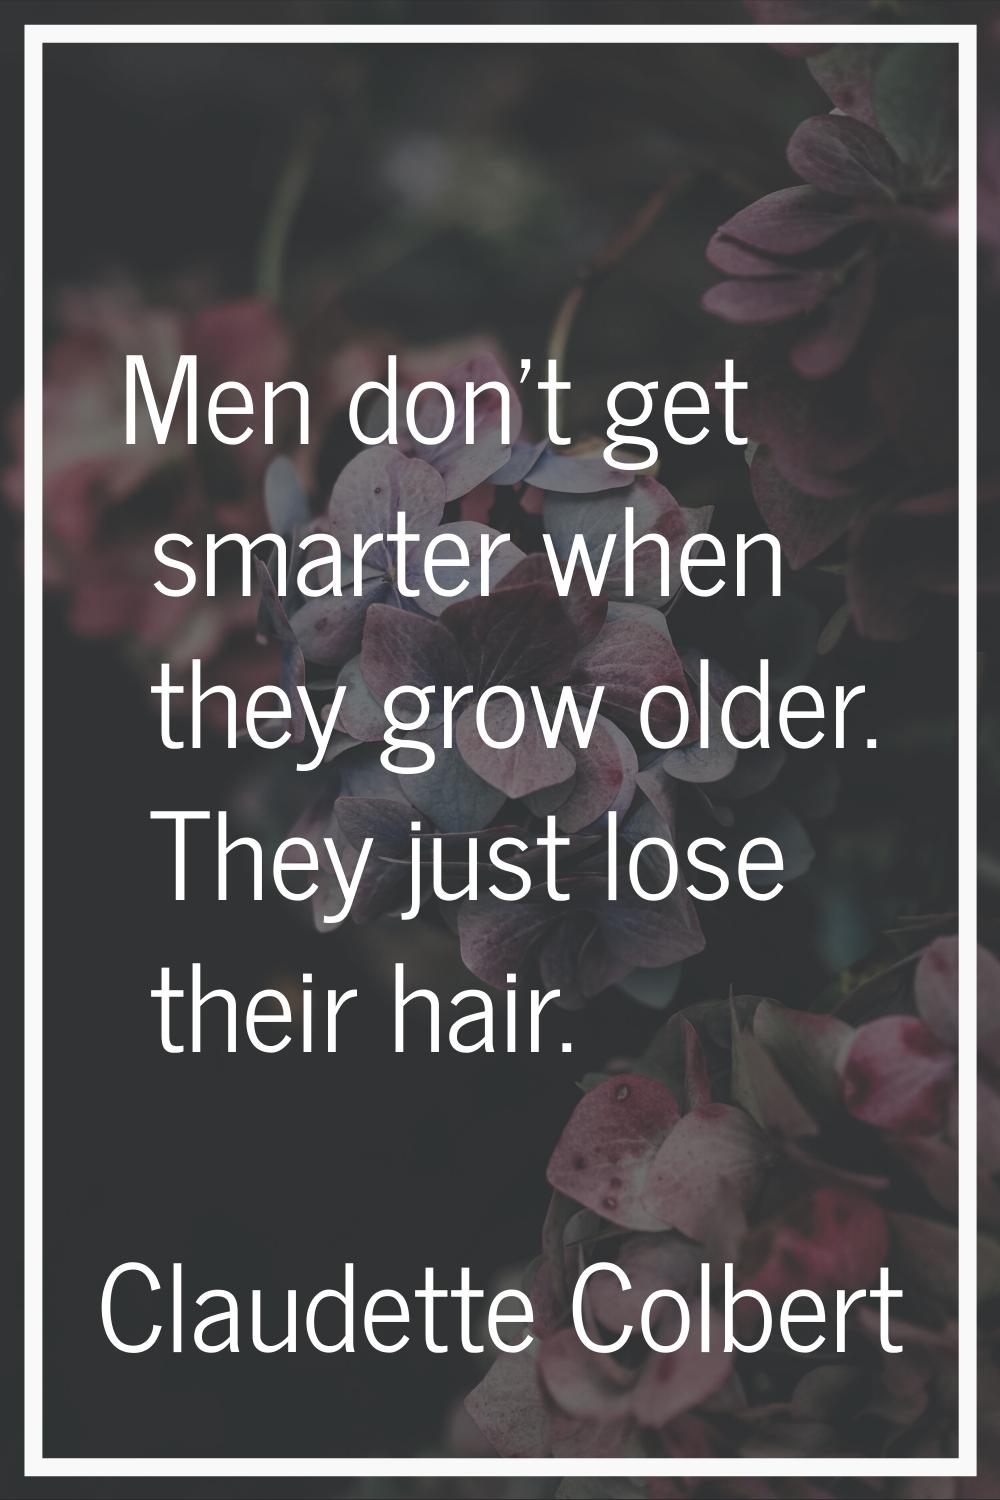 Men don't get smarter when they grow older. They just lose their hair.